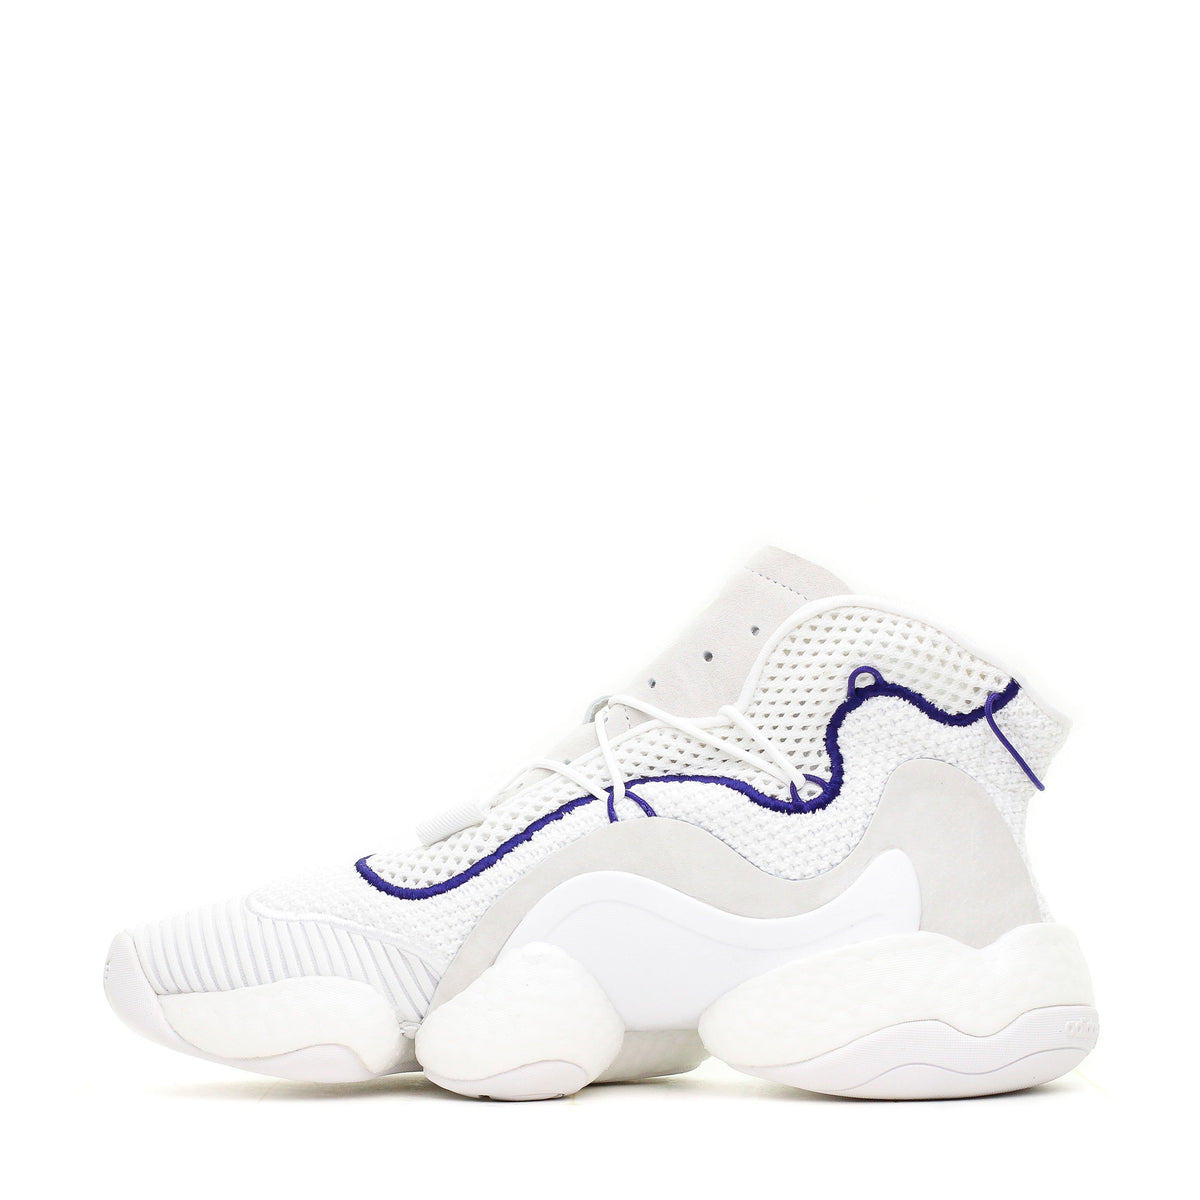 HotelomegaShops - Originals Crazy BYW LVL 1 Boost You Wear White Purple CQ0992 (Fast - adidas munchen green white black shoes blue laces